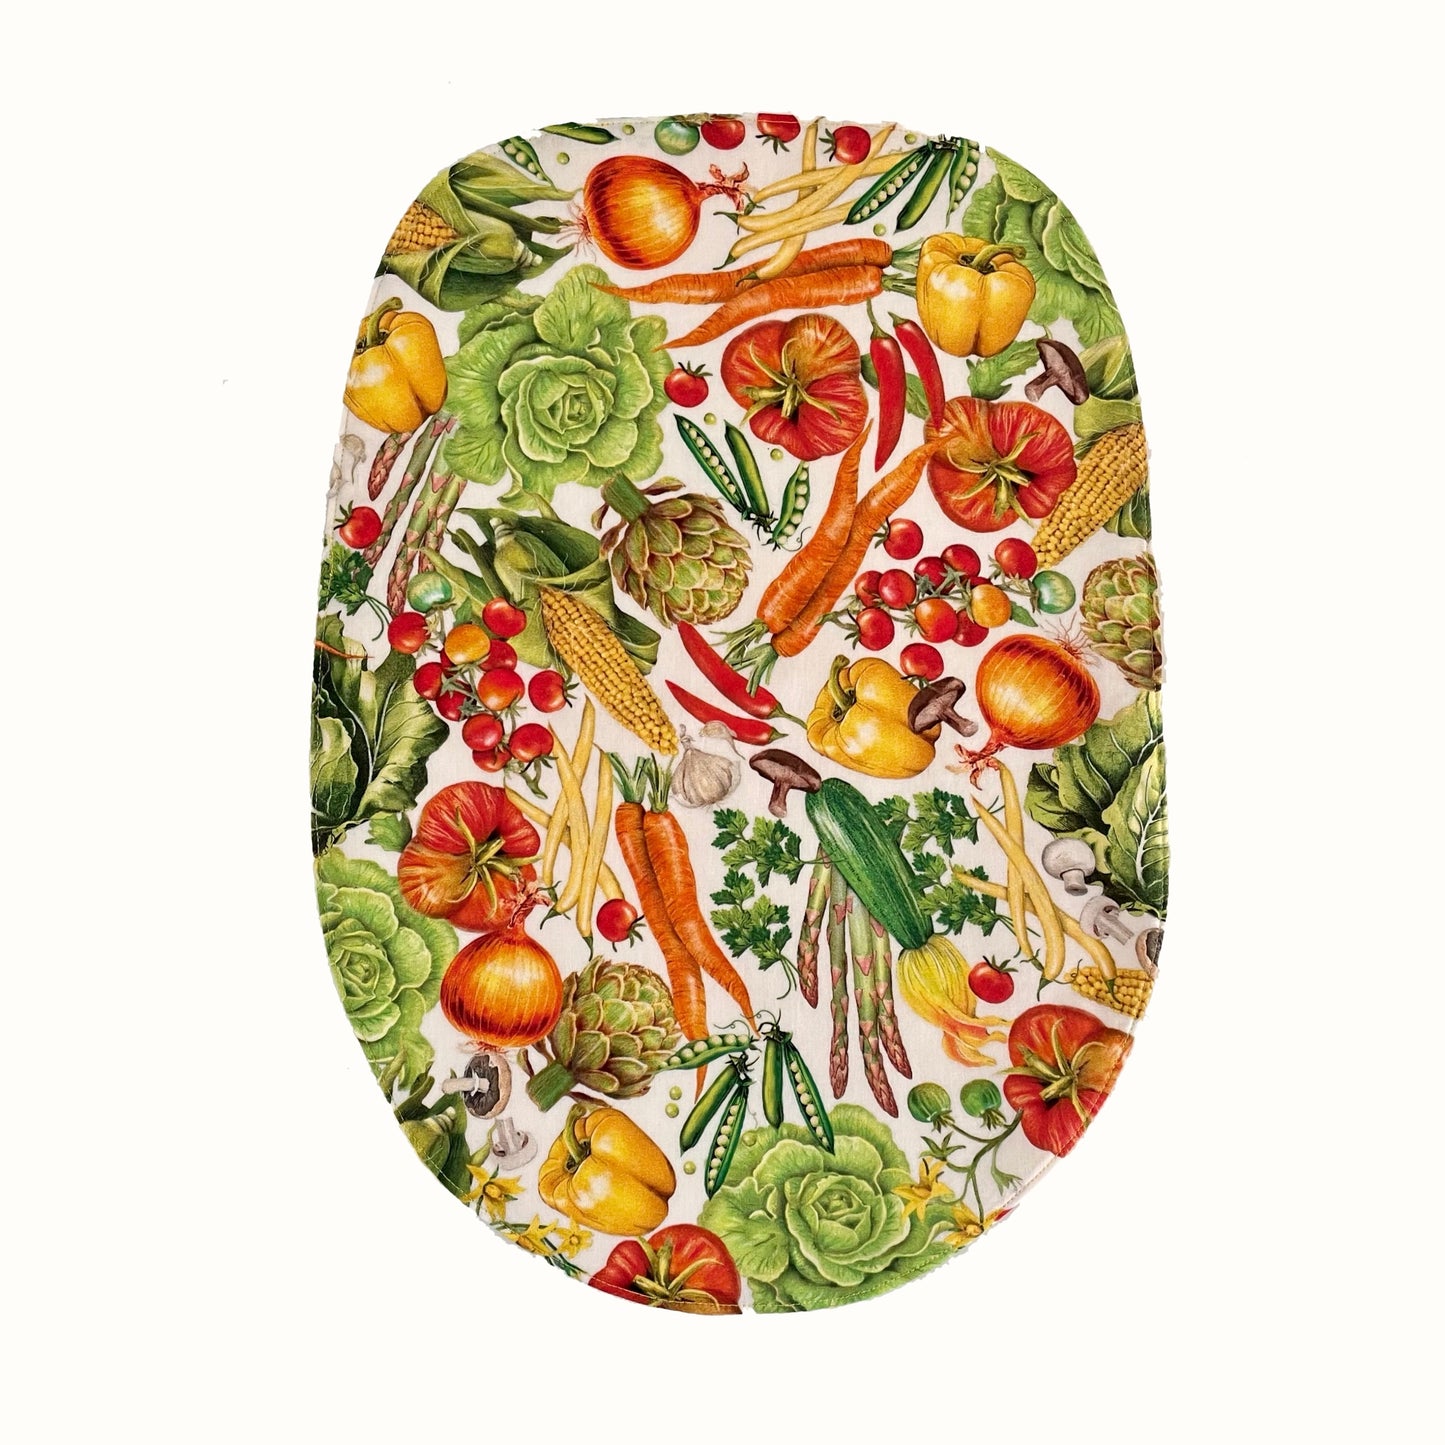 Stand Mixer Slider Mat - Vegetables - Down on the Farm